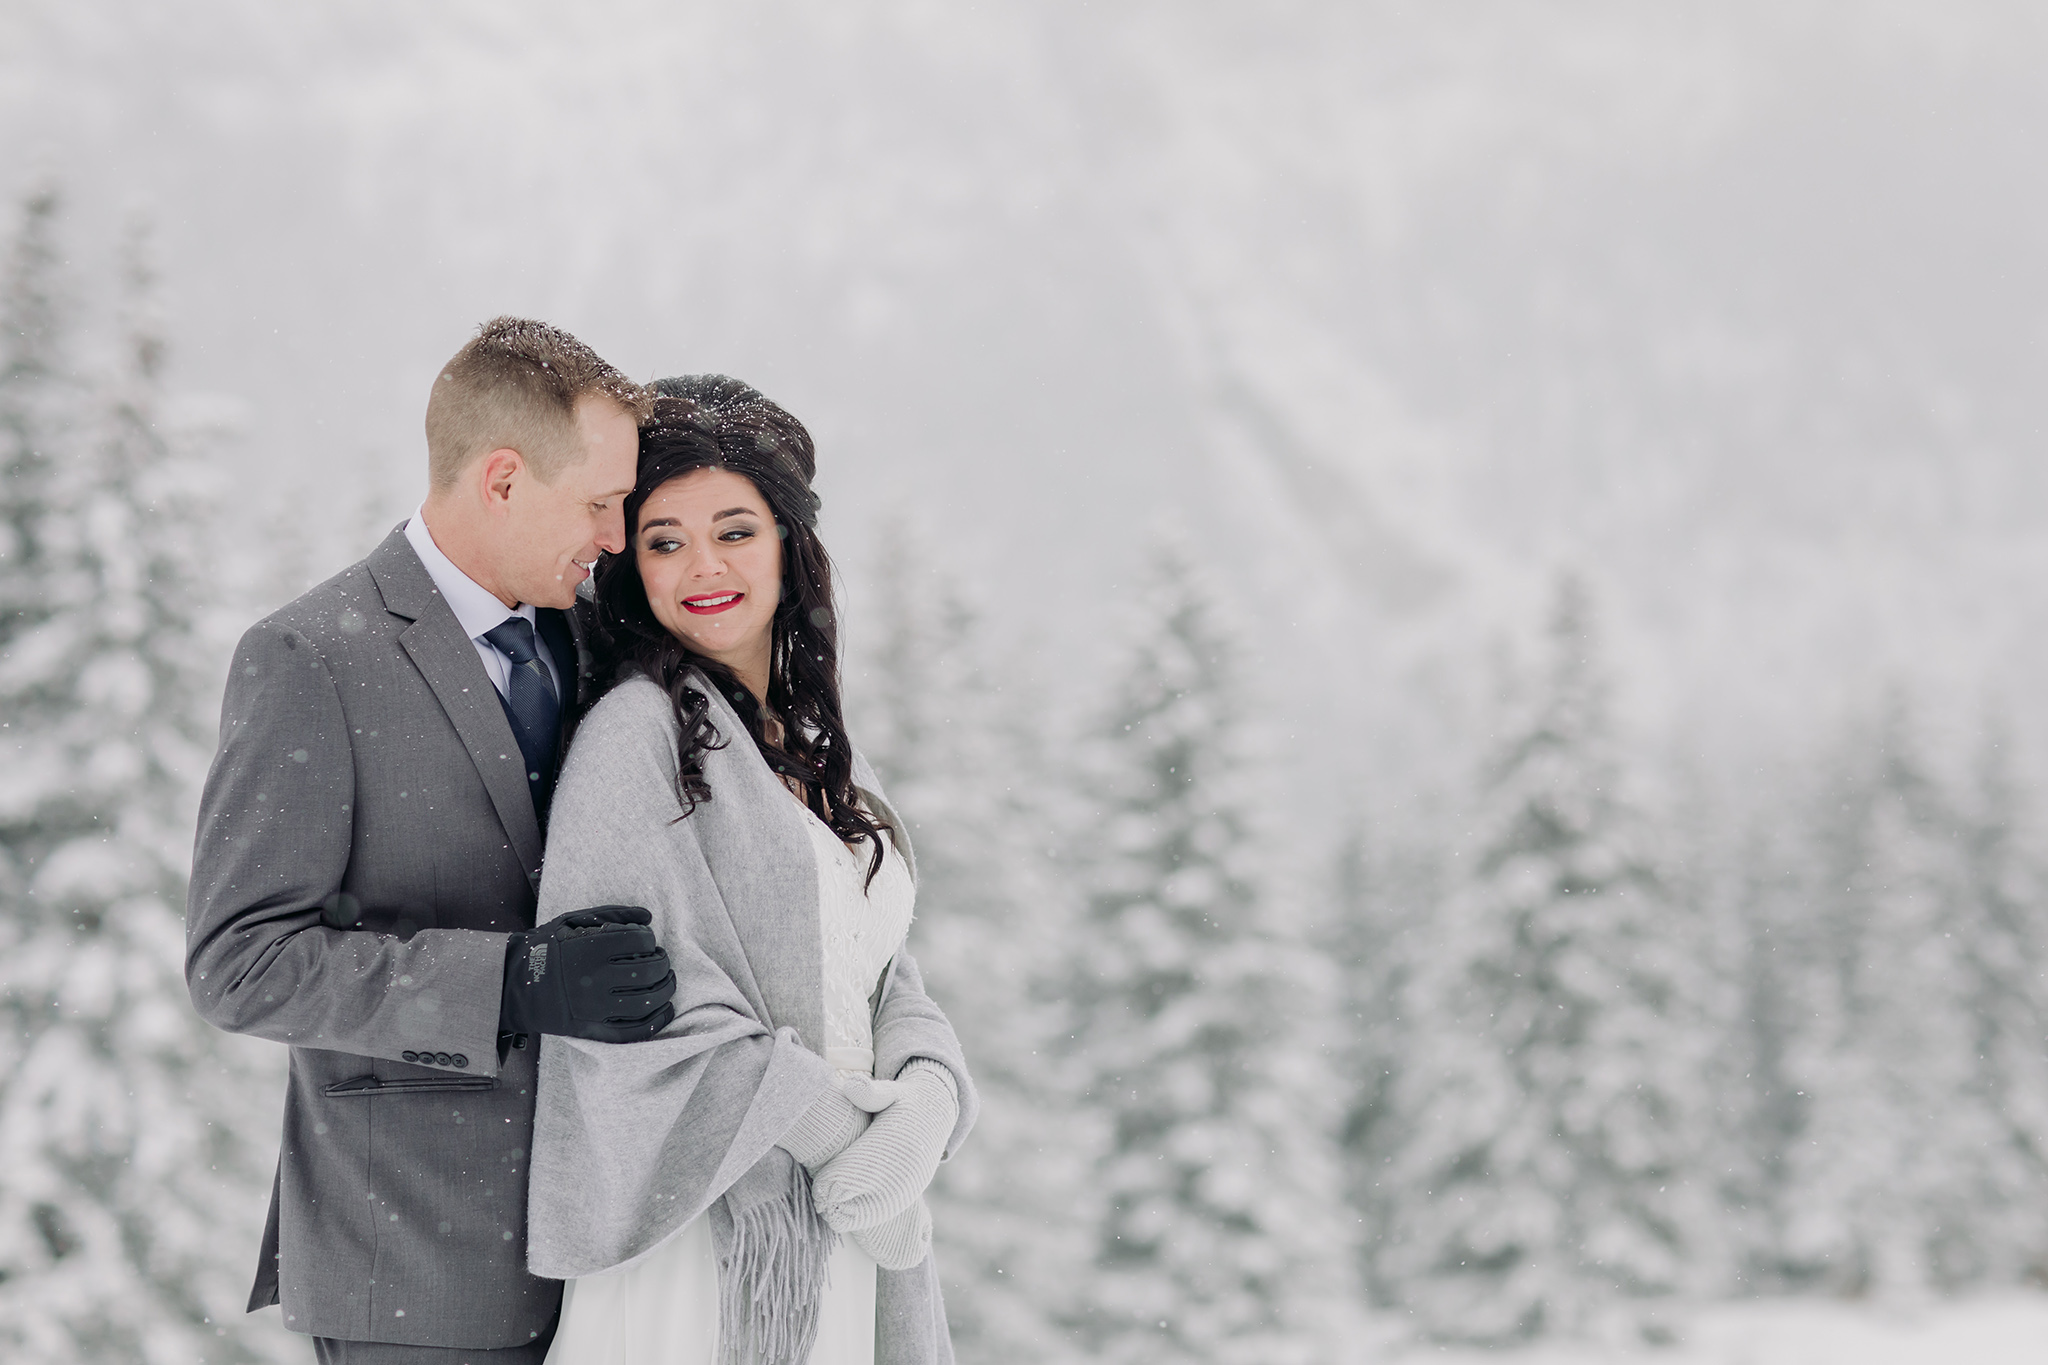 Cascade Ponds winter wedding portraits in a snow storm in Banff National Park in the Canadian Rocky Mountains photographed by ENV Photography